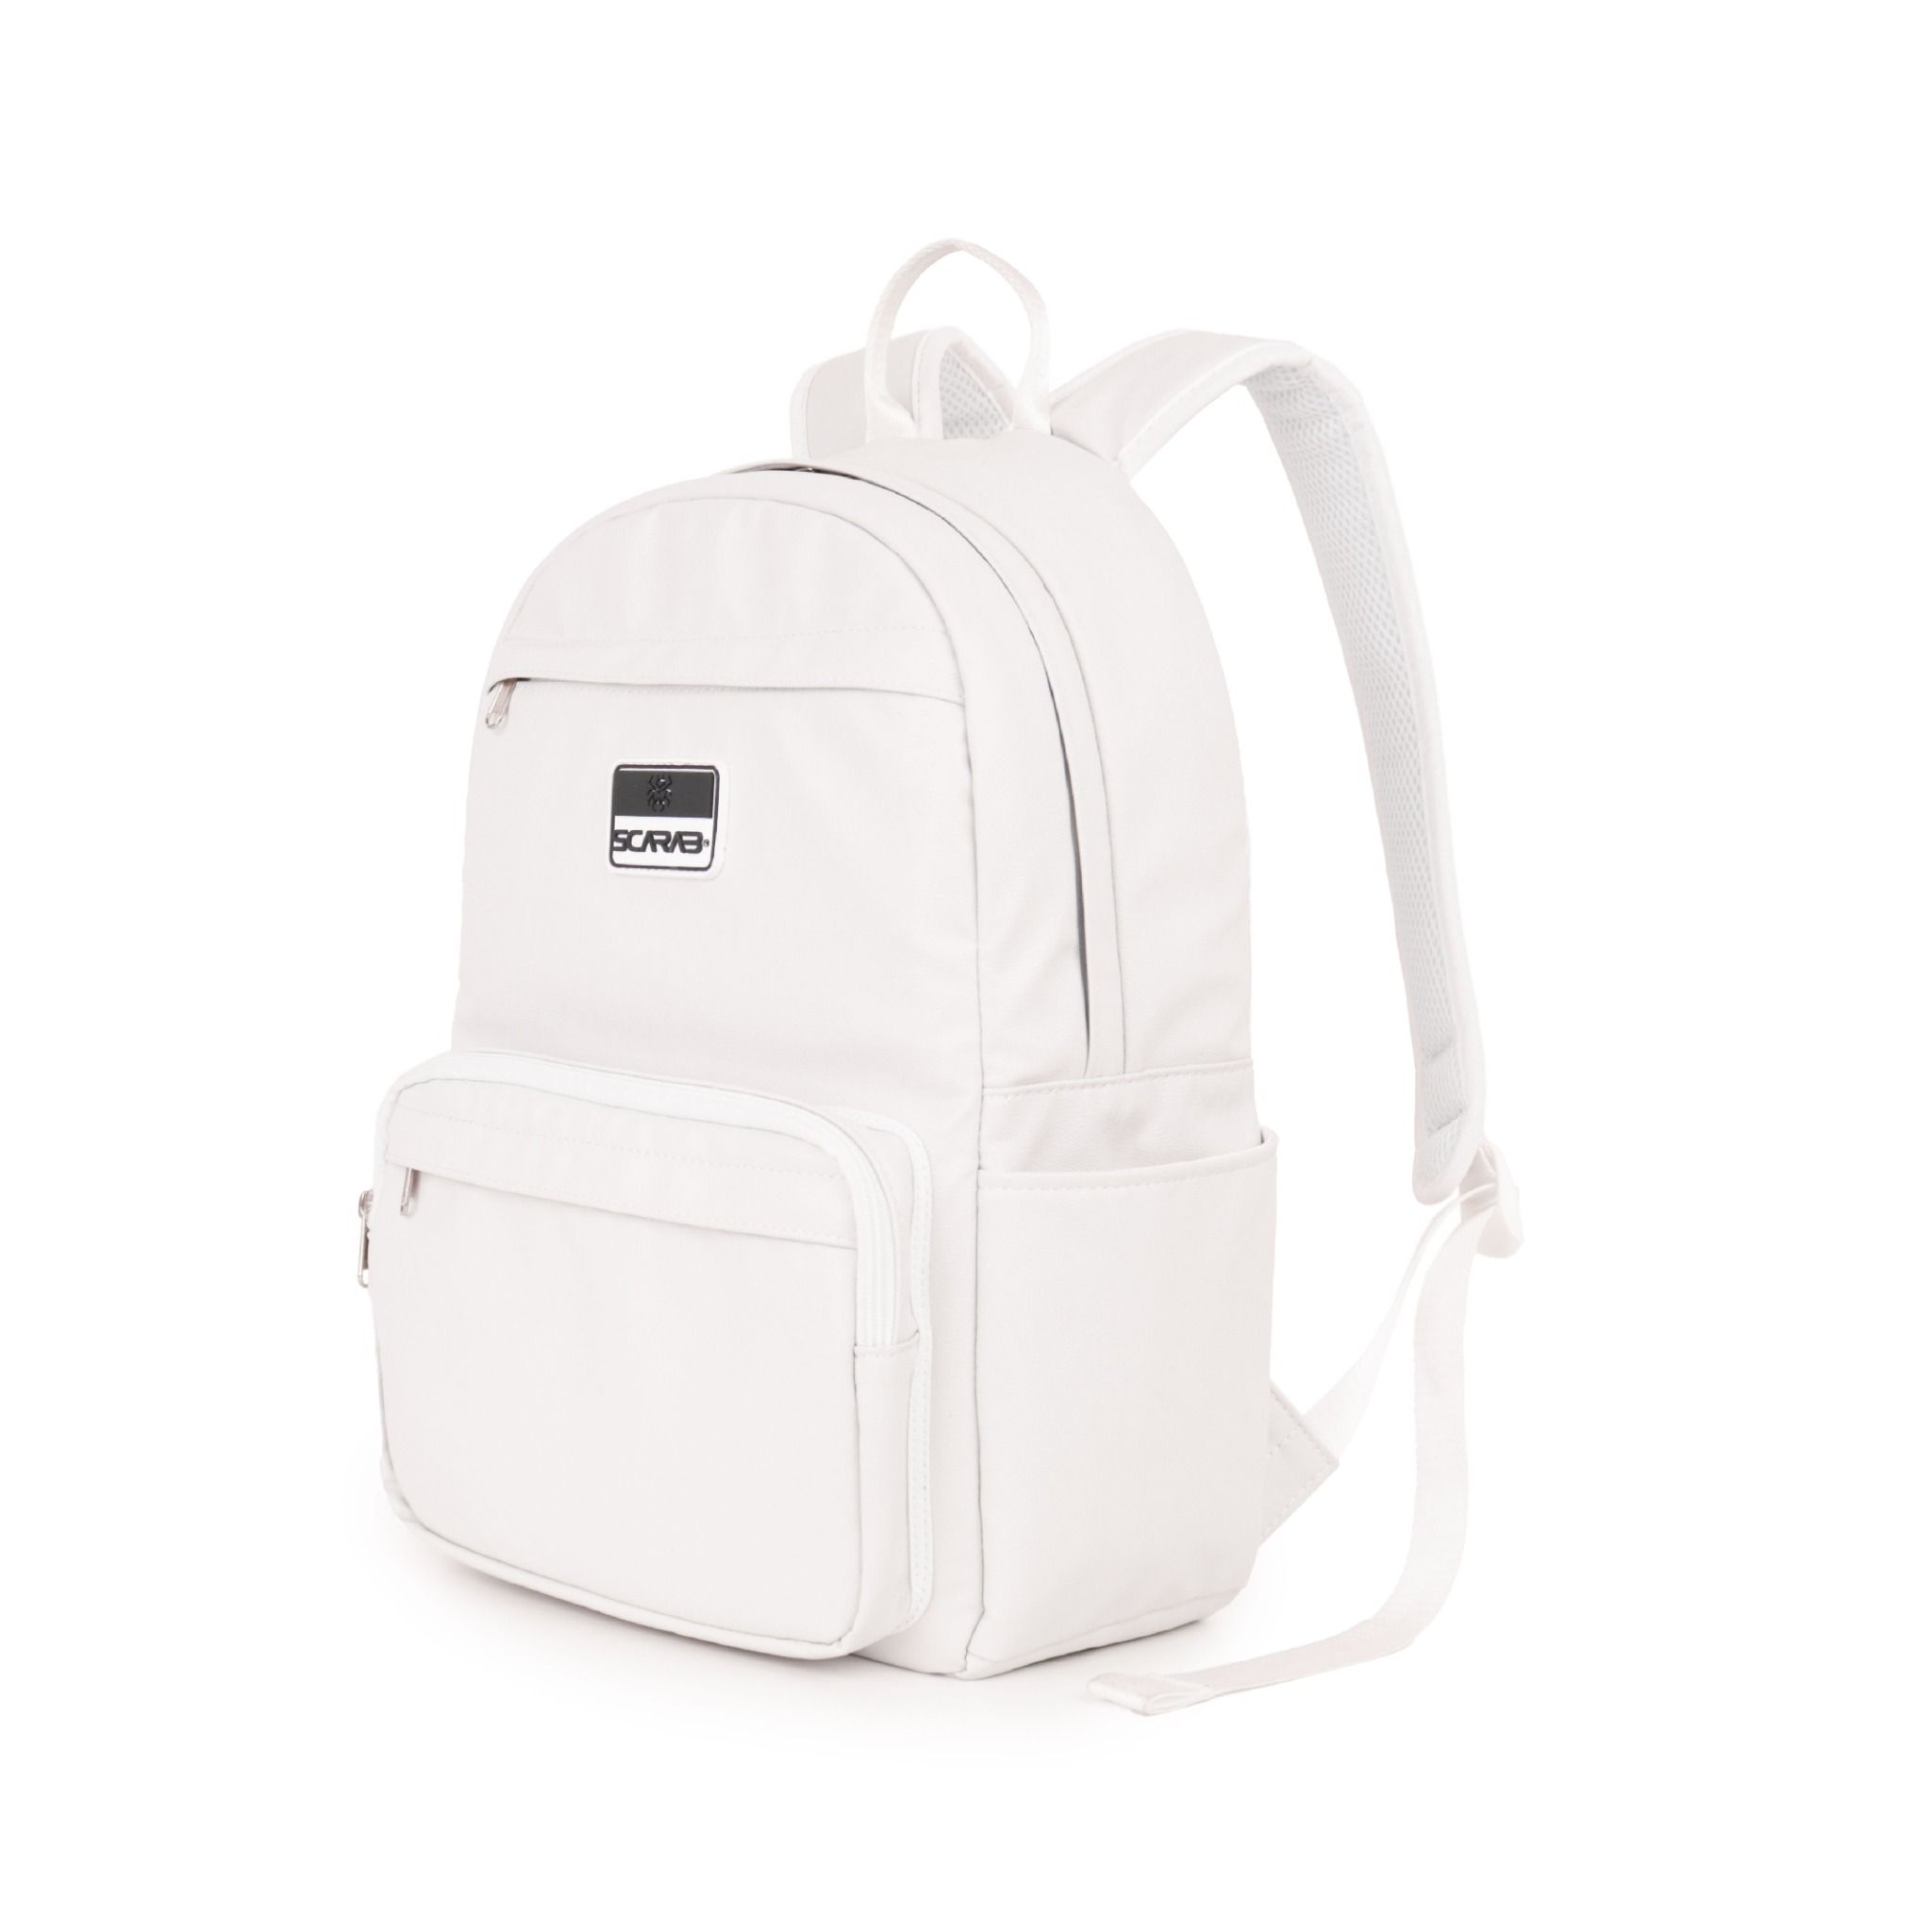  Multi Leather Backpack - White 